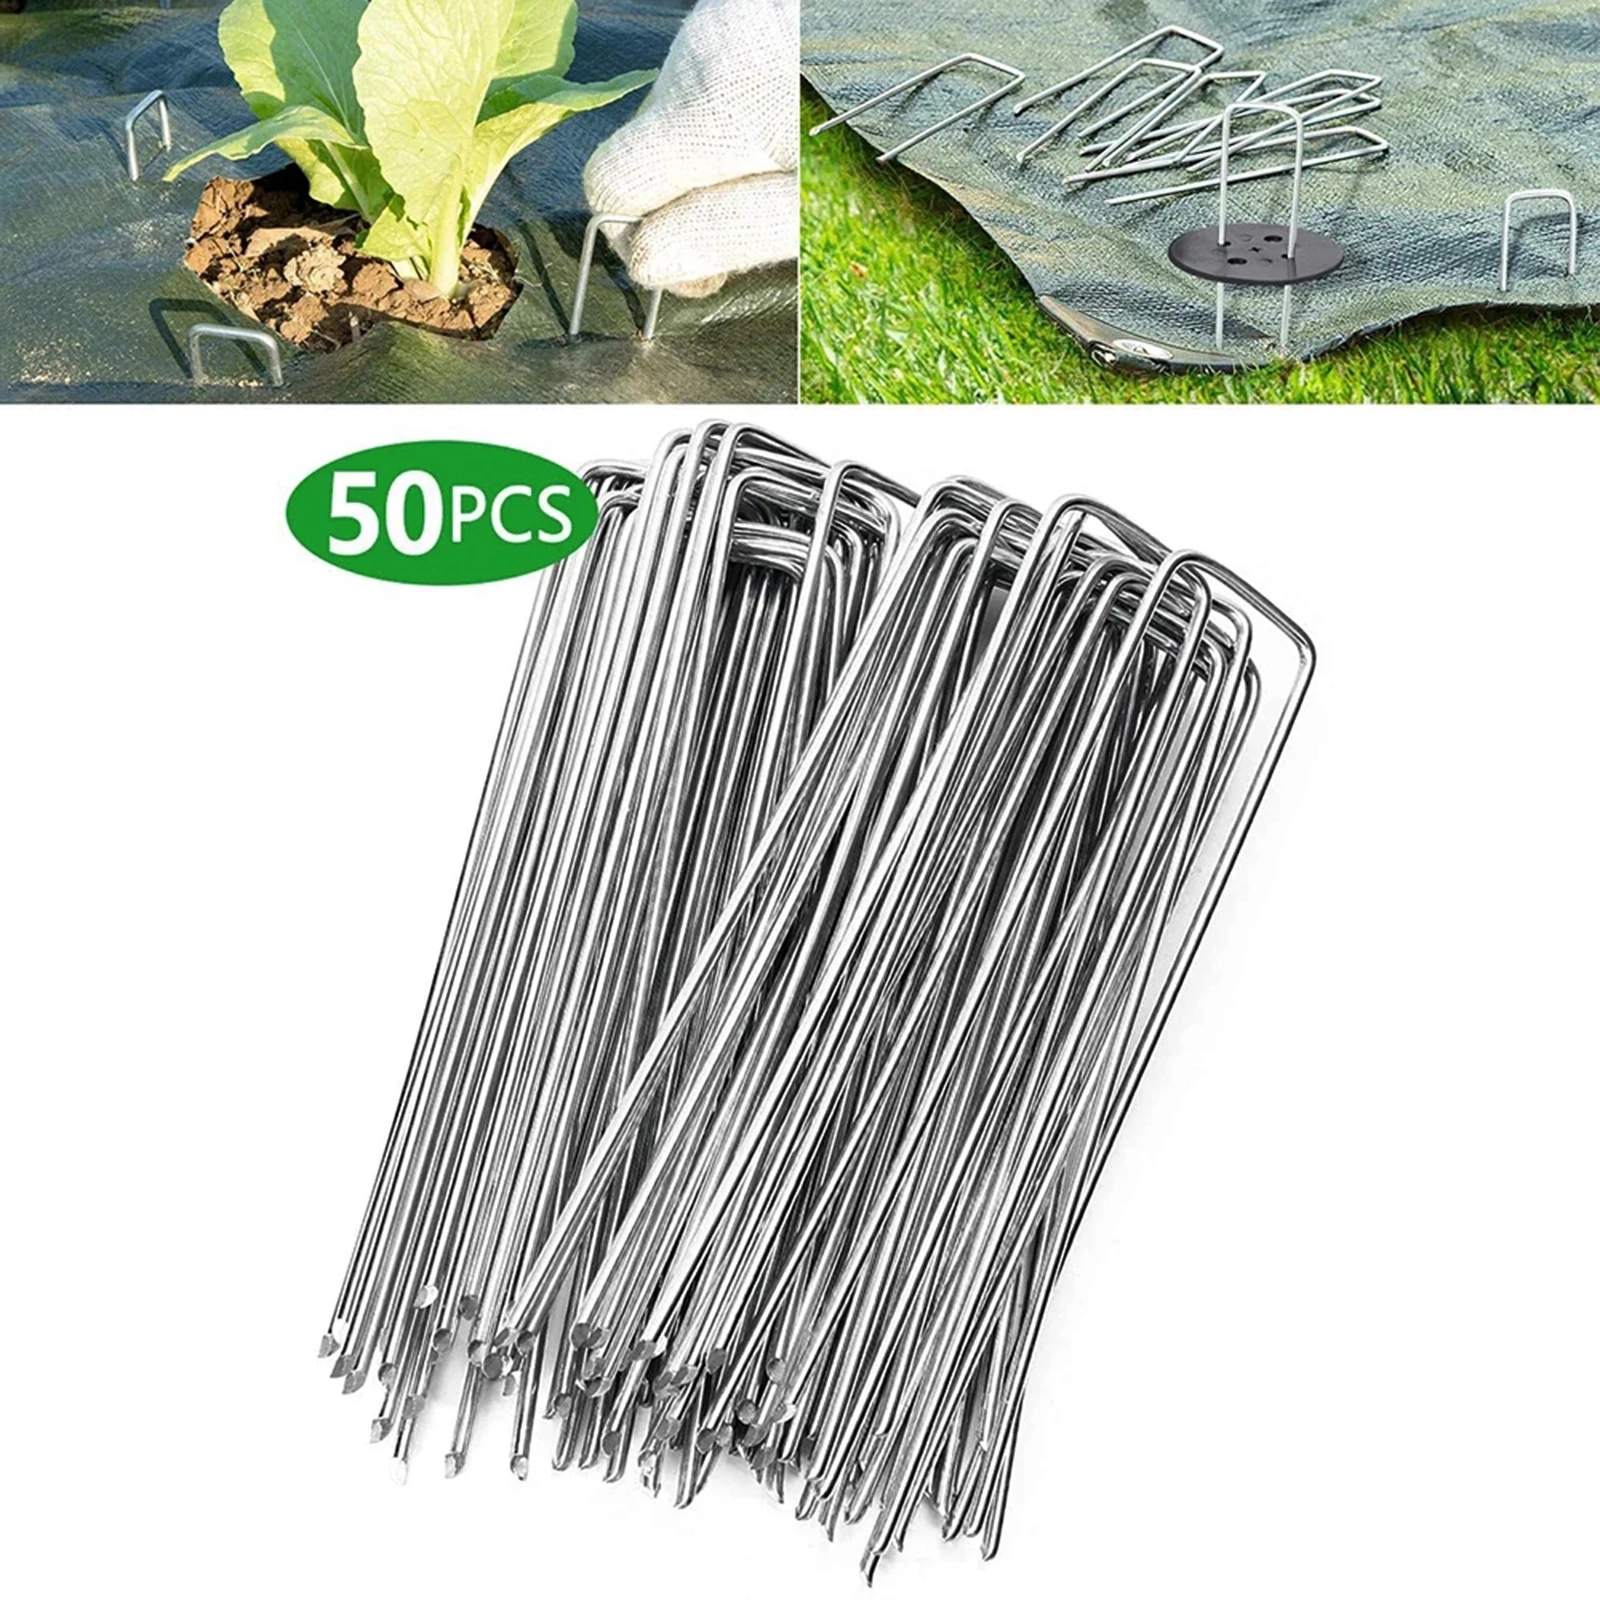 50x Galvanised Metal Ground U Tent Pegs Landscape Staples Special Pin For Fixing